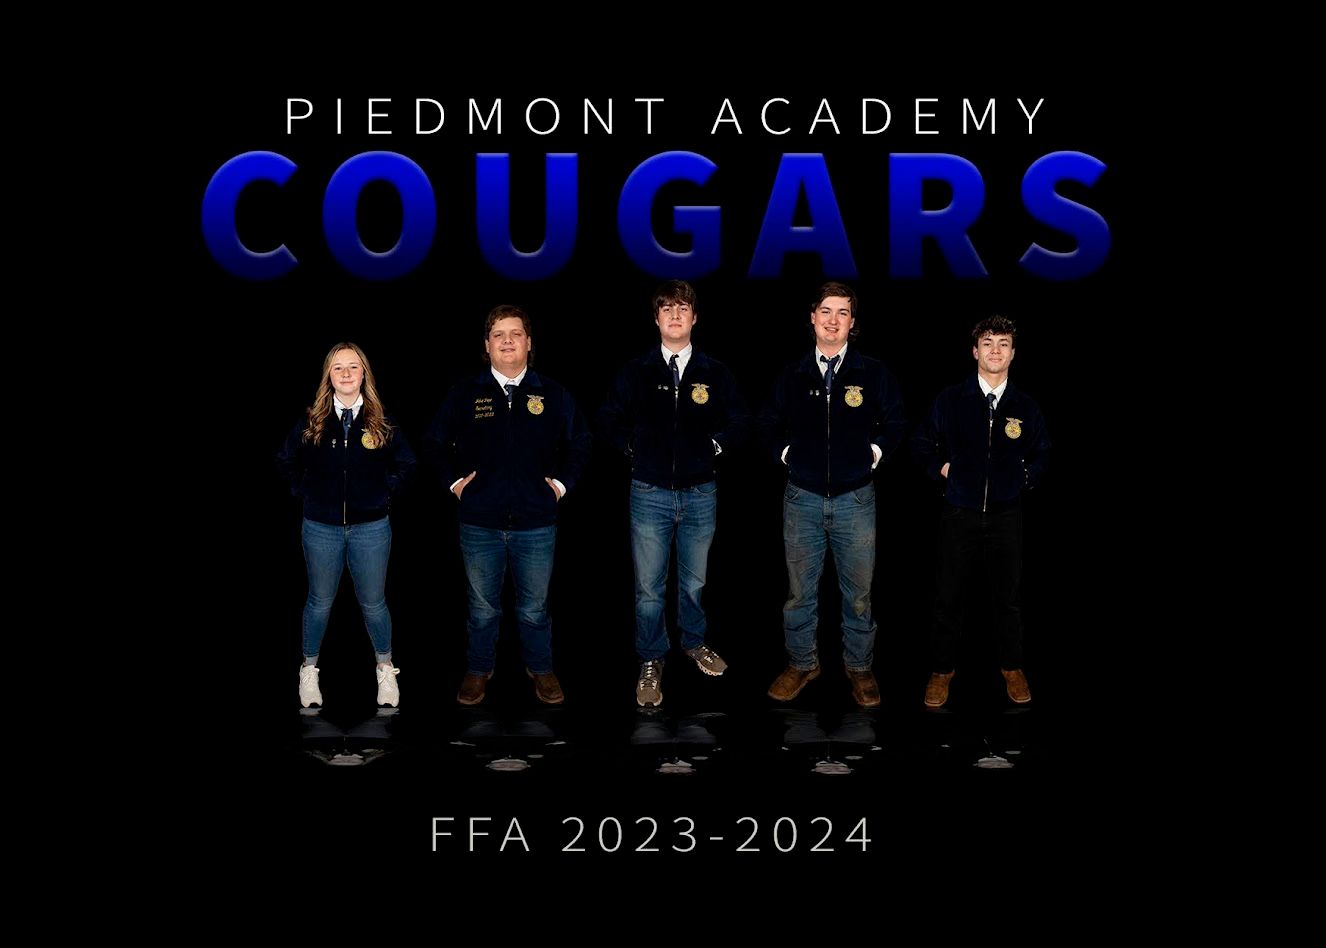 a group of people standing next to each other in front of a sign that says piedmont academy cougars .